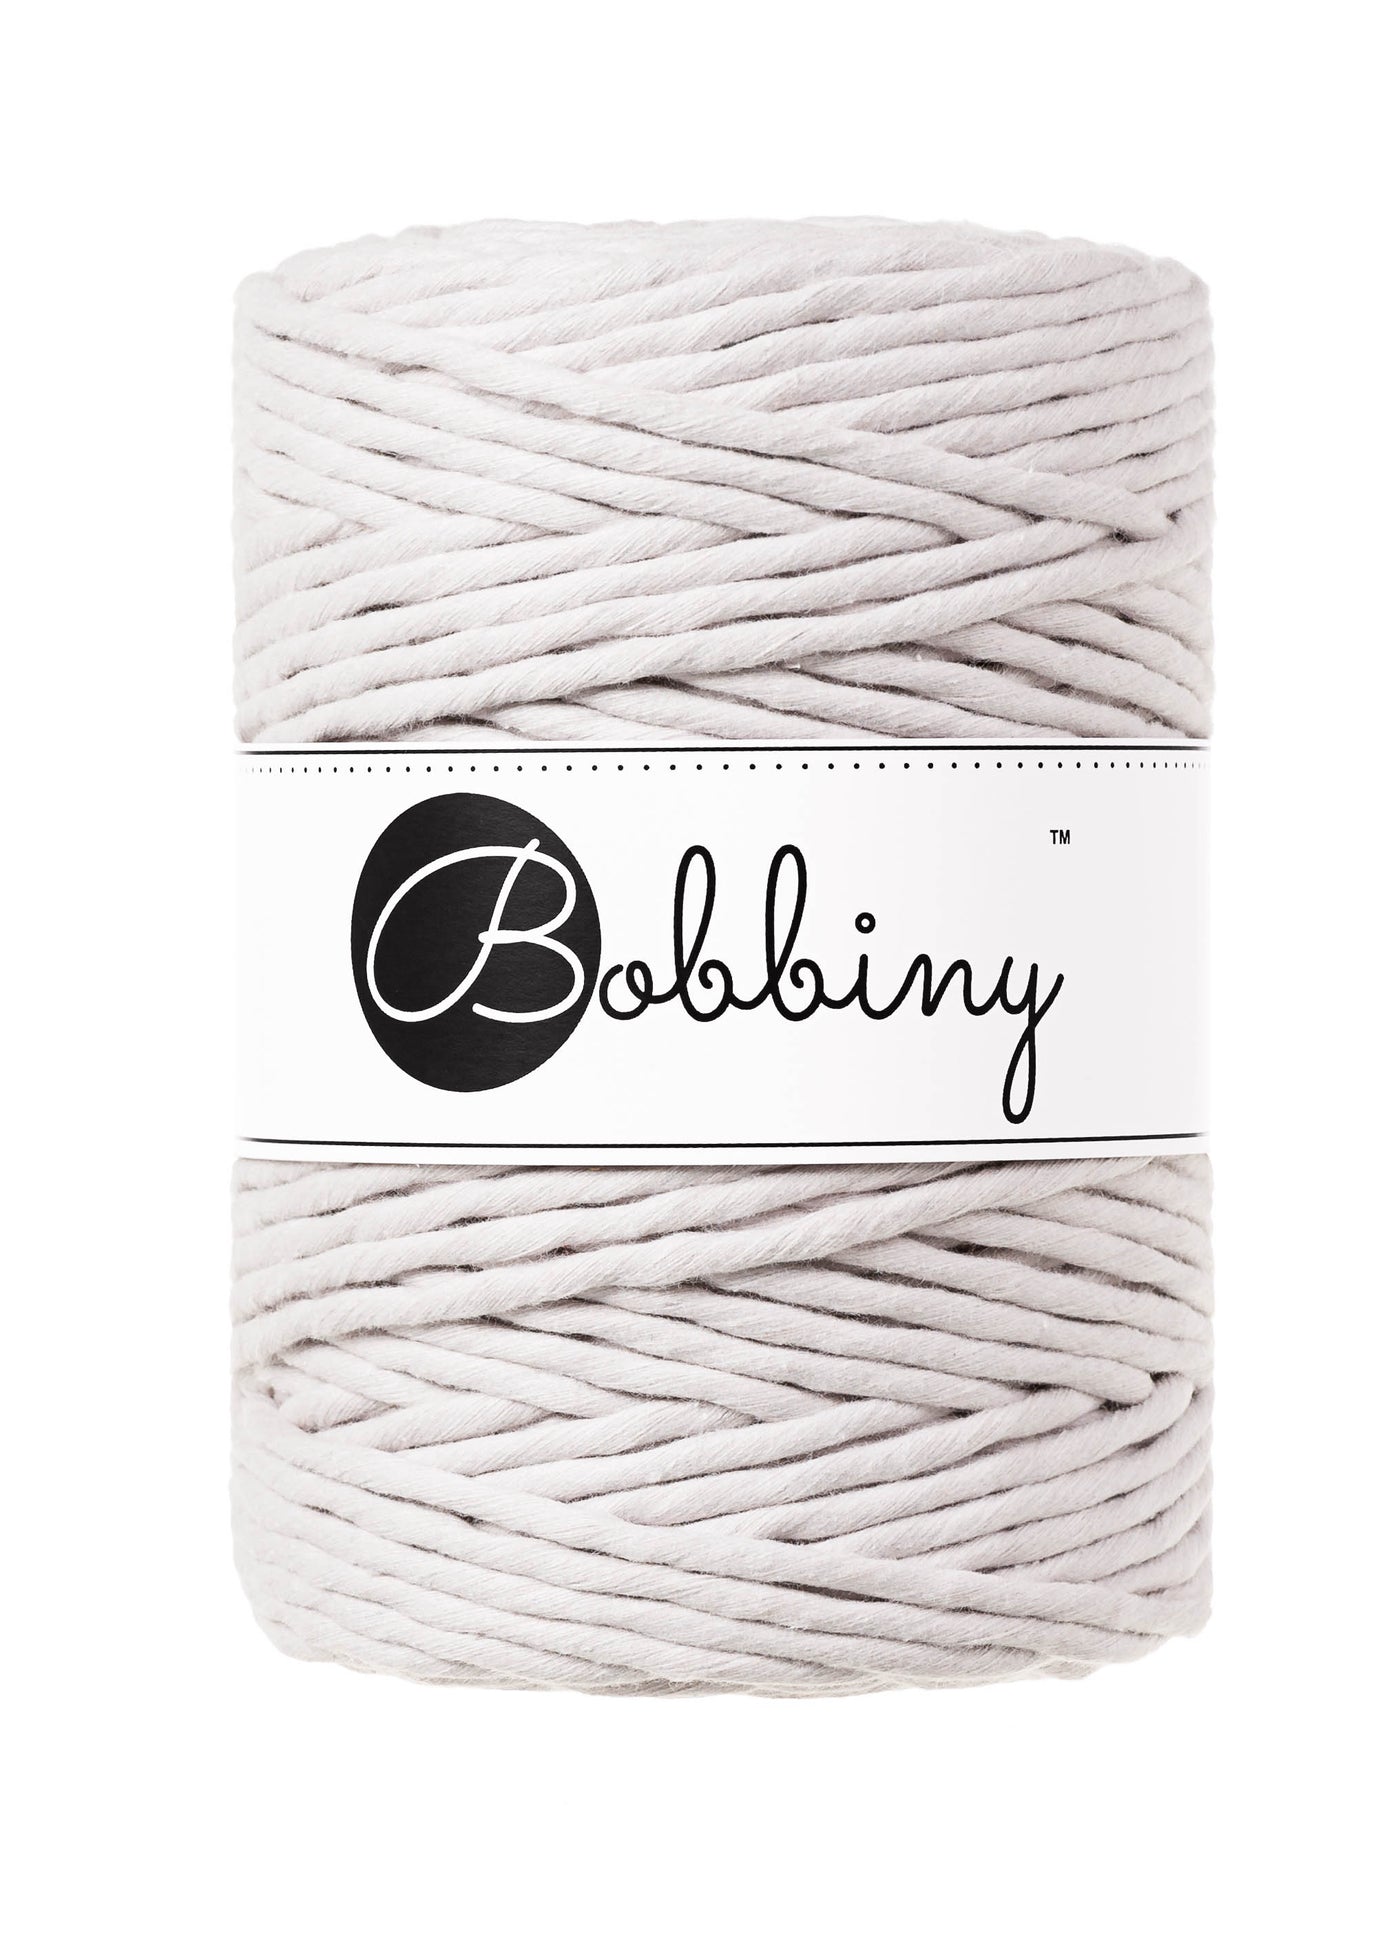 This super soft cord is perfect for Macrame or any other fibre art, and makes the most spectacular fringes and tassels.  It is made from 100% recycled cotton, is single twist and contains 112 individual fibres.  It contains no harmful substances and is approved to Oeko-Tex standards.  The inner spool is made from recycled paper and is biodegradable.  Length 100m (108 yards)  Weight 660 gms